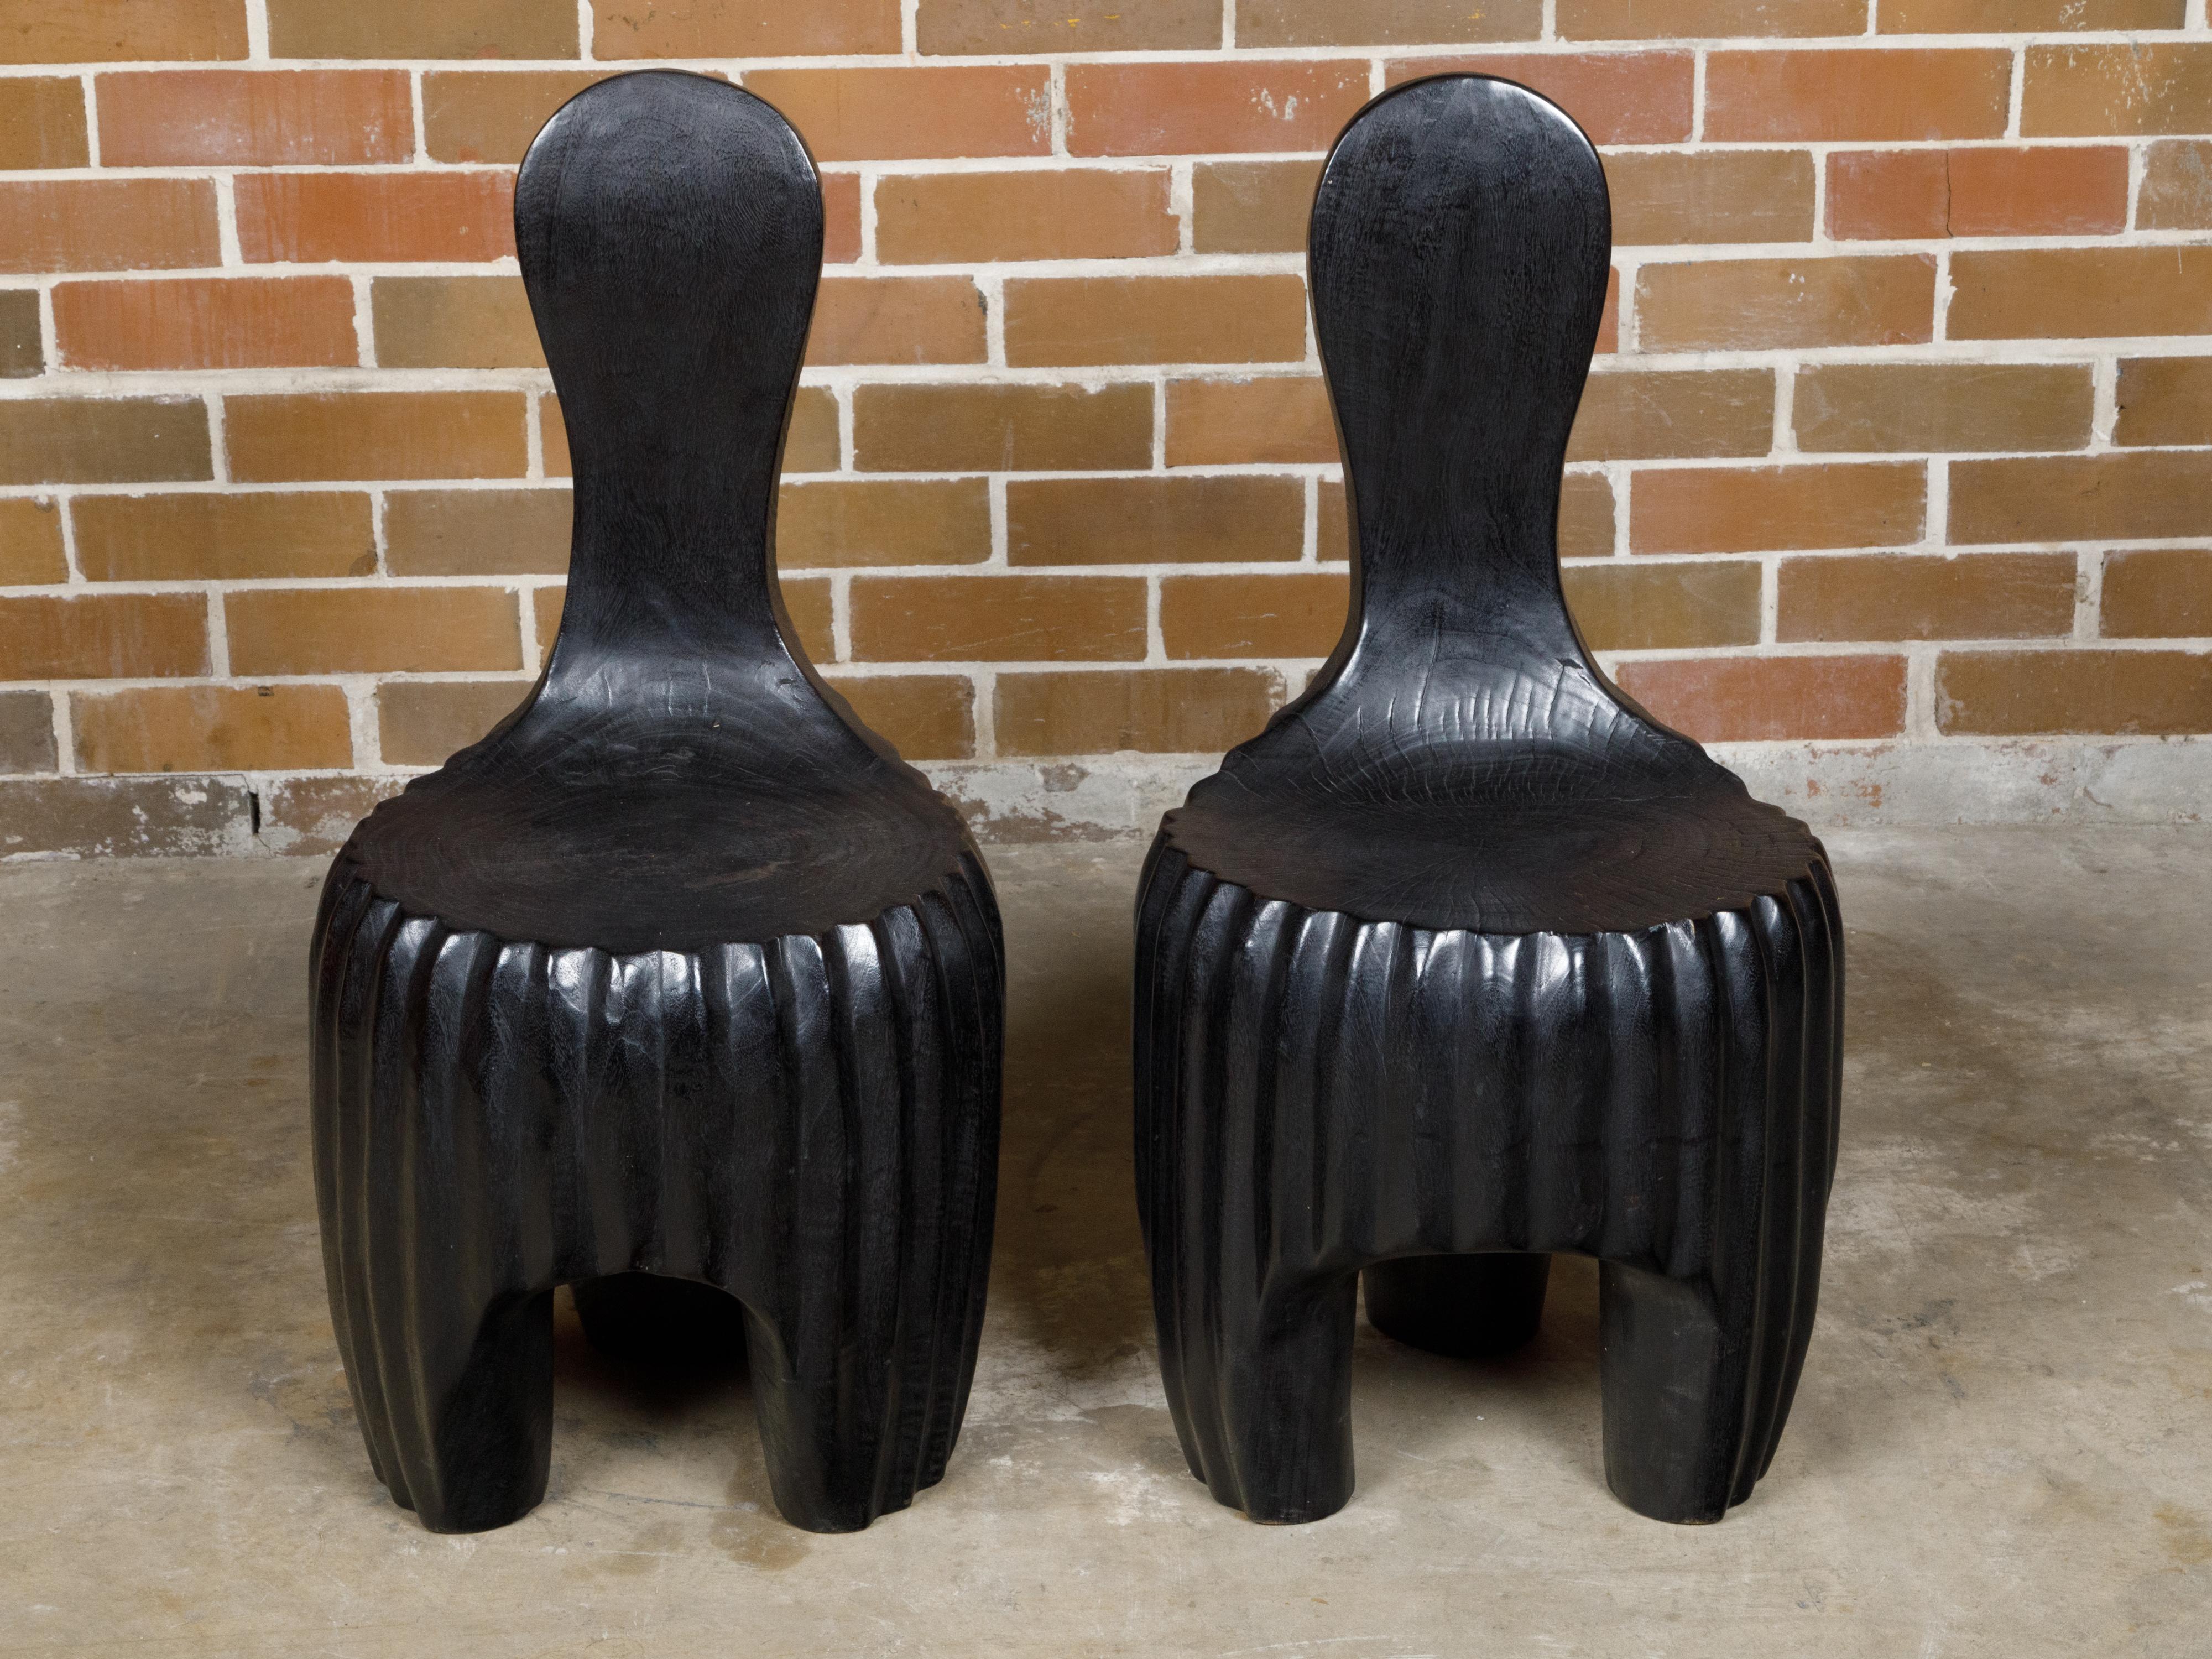 A sculptural pair of Midcentury African wood spoon back black chairs with carved reeded bases. This sculptural pair of Midcentury African wood chairs embodies the essence of artistic furniture design. With their distinctive spoon back silhouette,